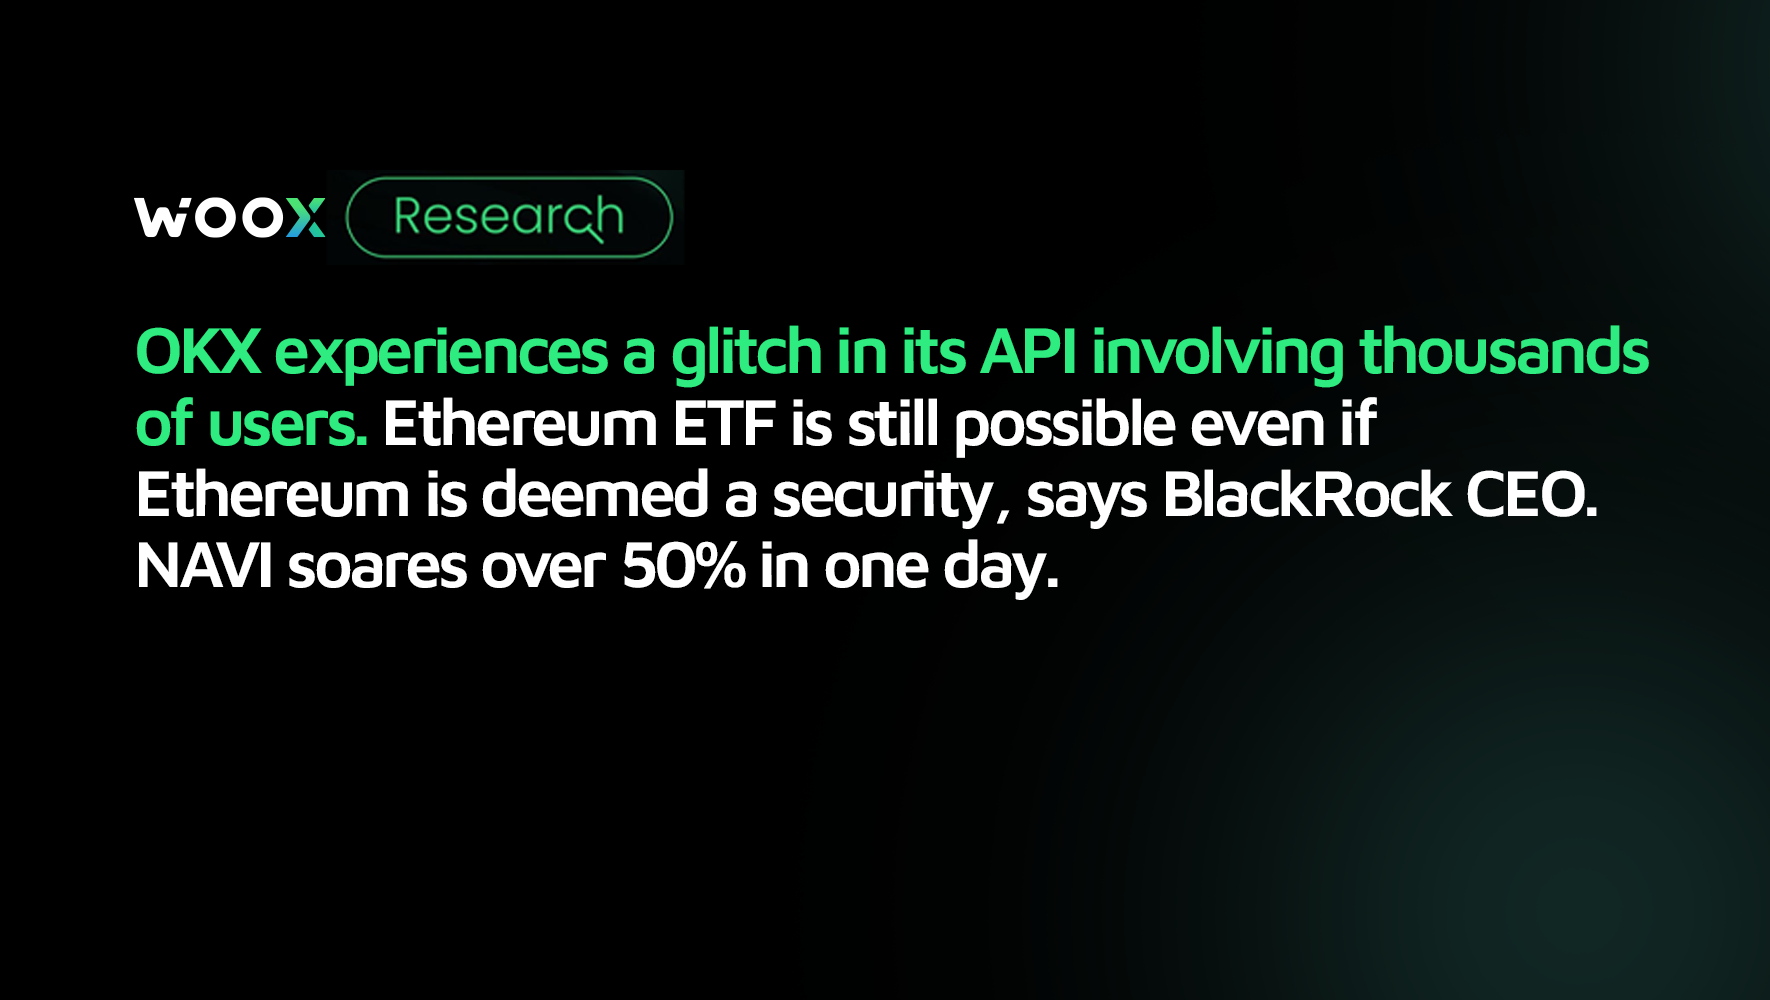 OKX experiences a glitch in its API involving thousands of users.